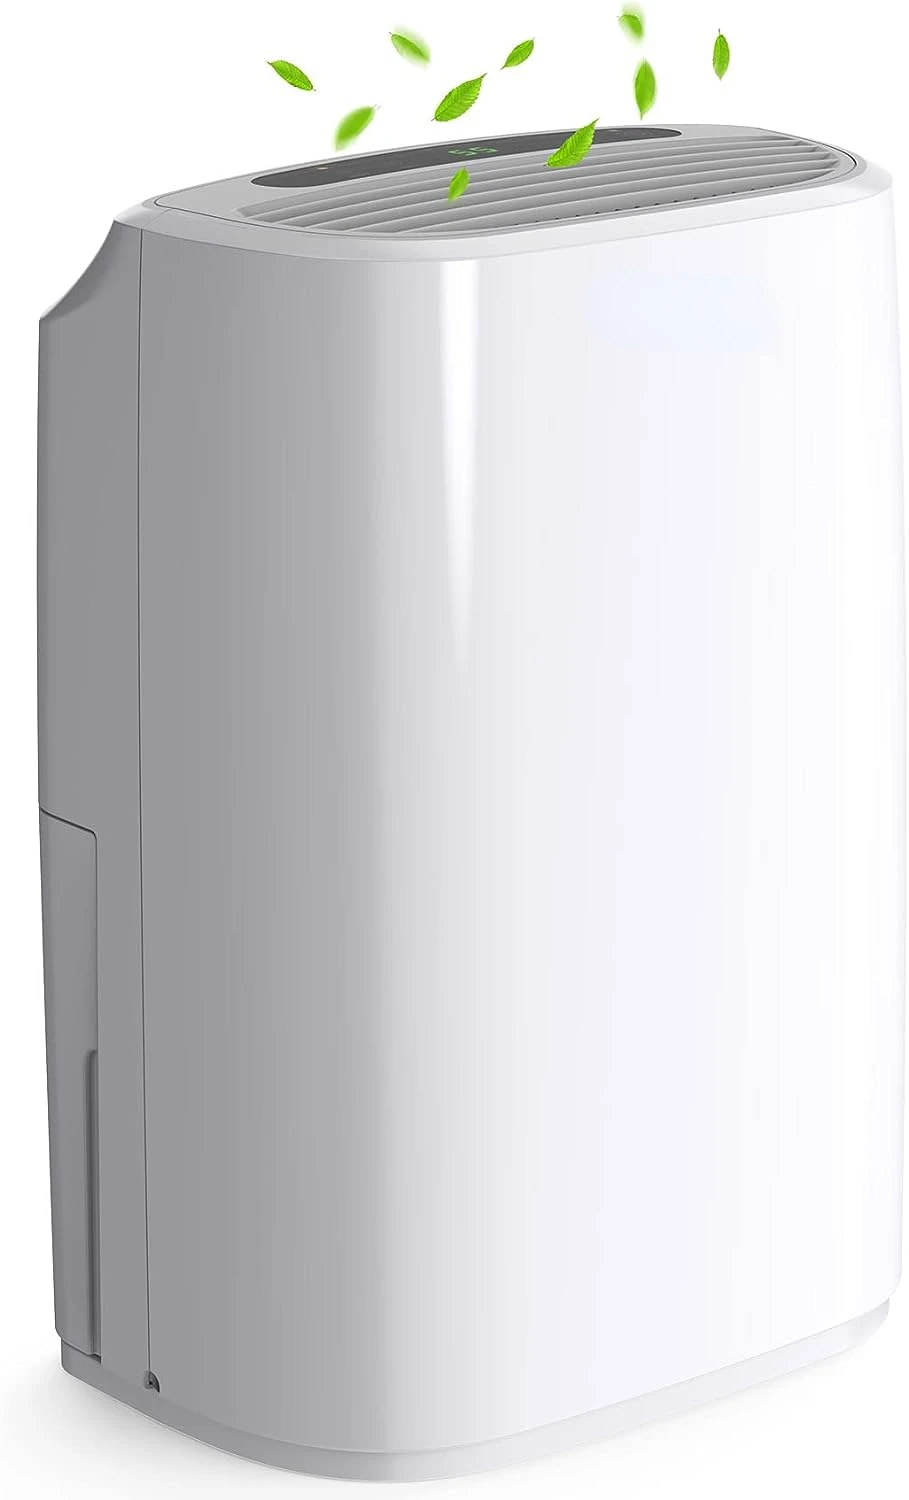 

Sq.Ft Dehumidifiers for Large Room and Home Basements, 31 Pints Dehumidifiers with Auto or Manual Drainage, 0.528 Gallon Water T